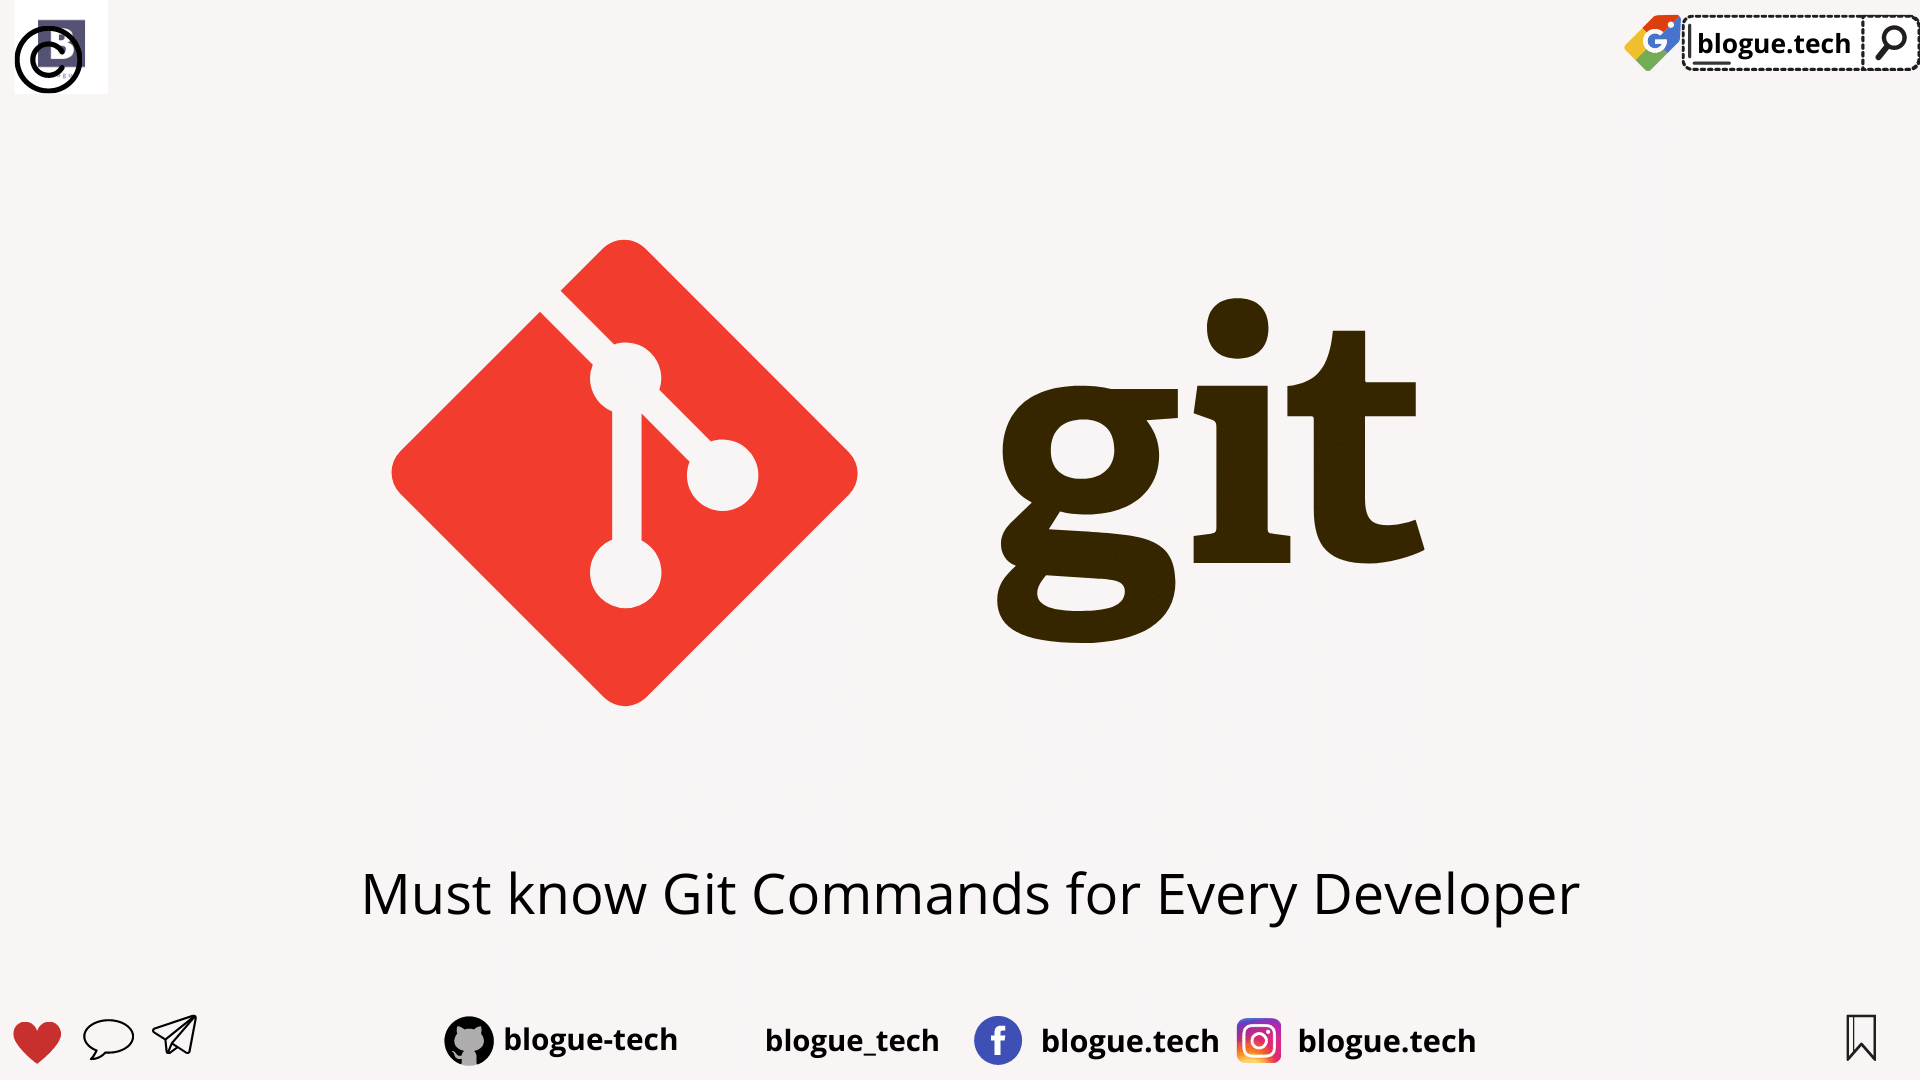 Must know Git Commands for Every Developer